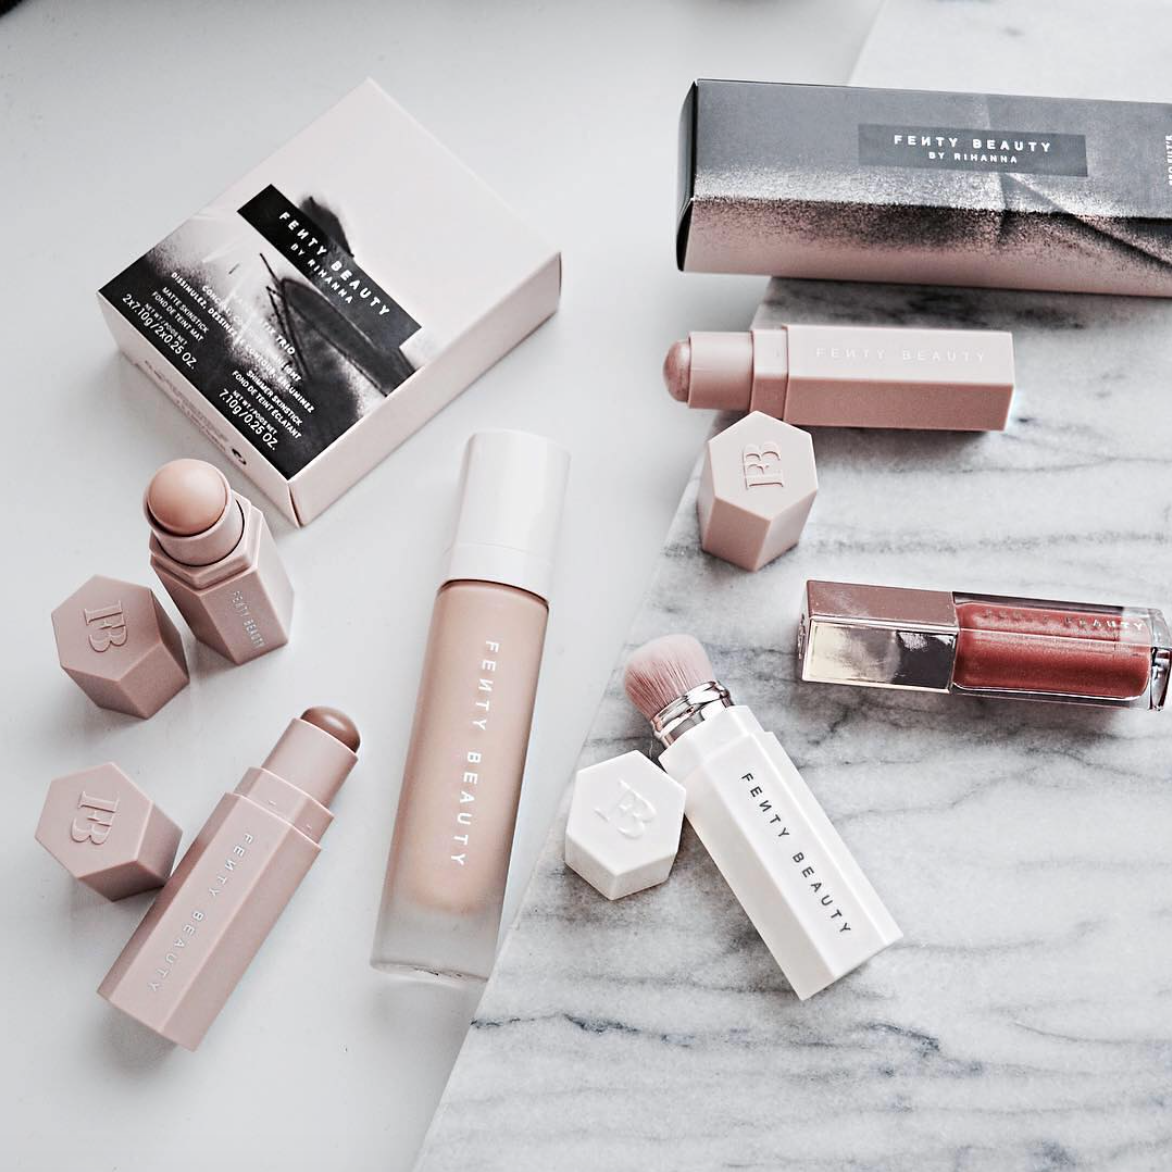 Fenty Beauty Replaced a Customer's Stolen Beauty Products